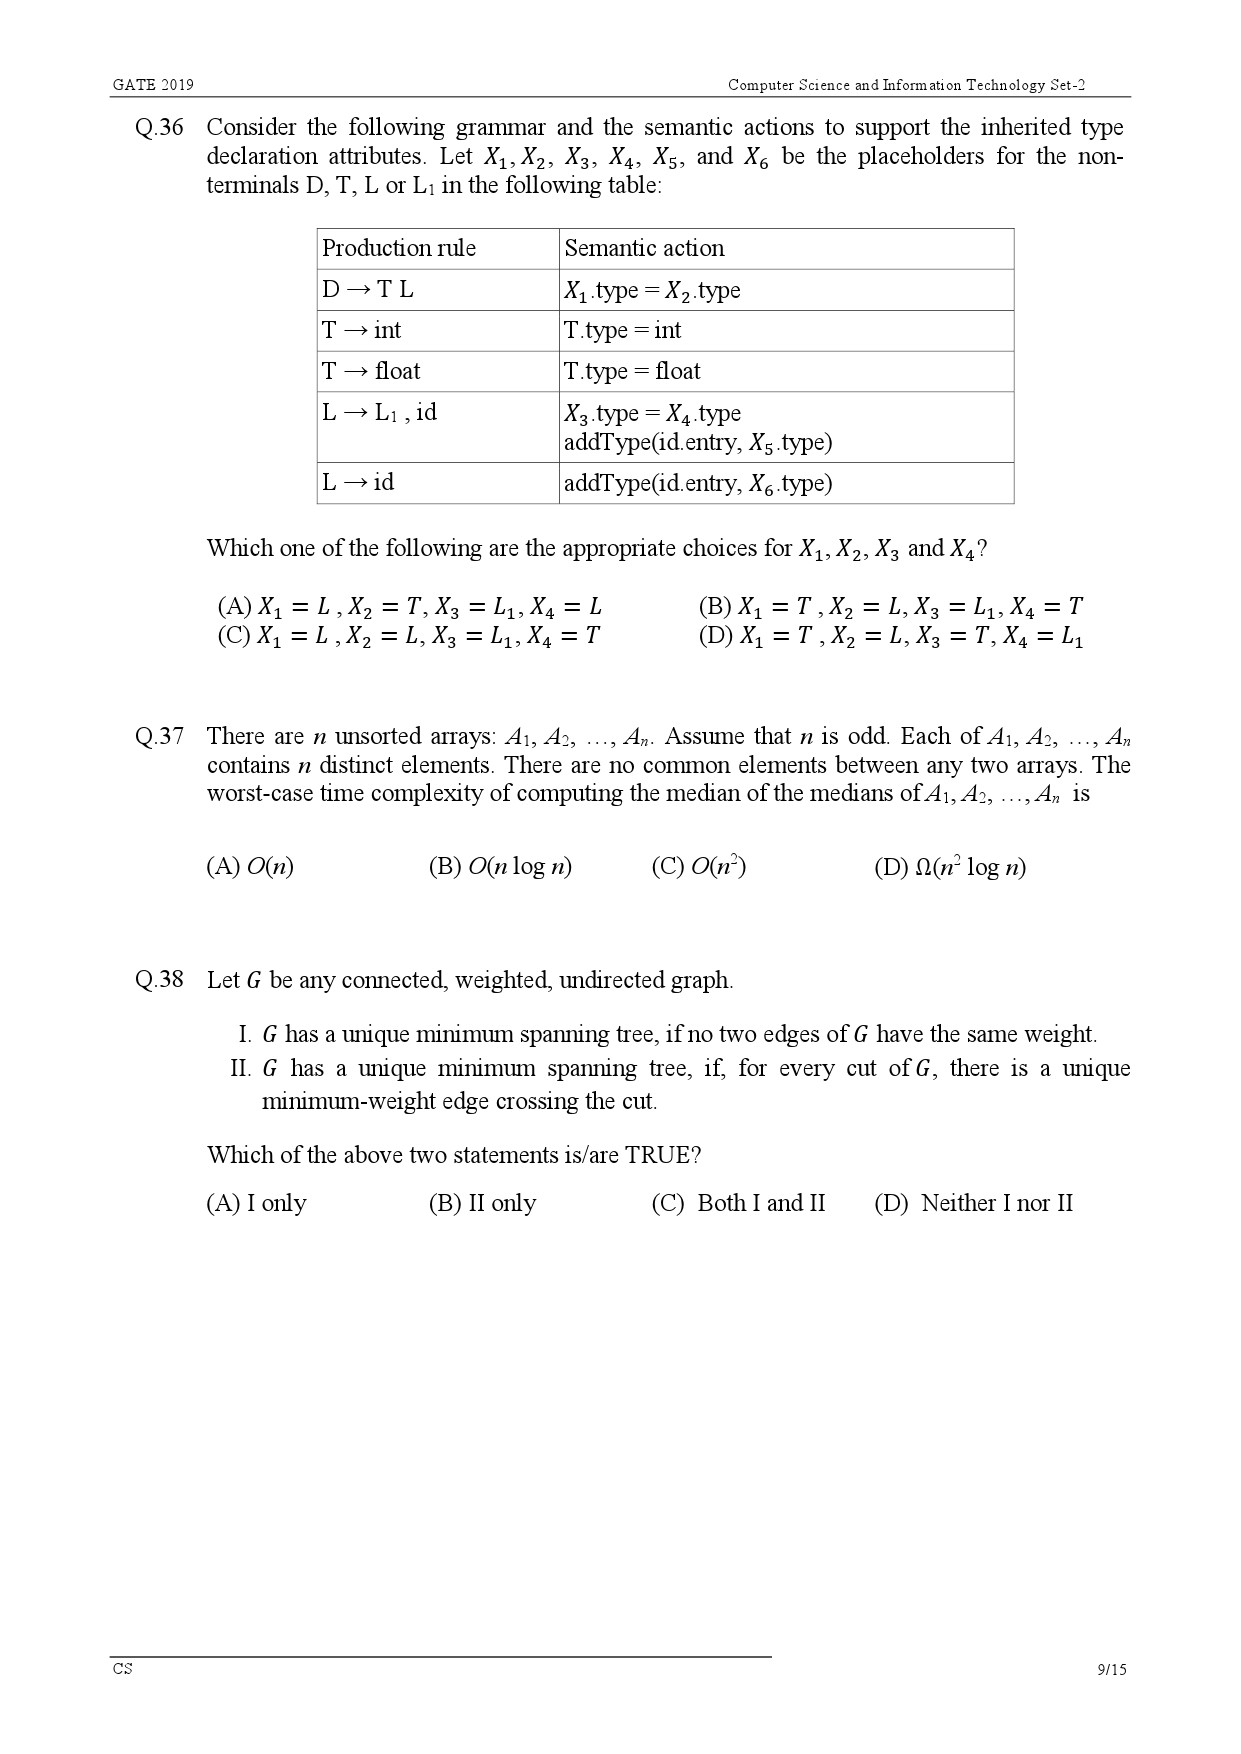 GATE Exam Question Paper 2019 Computer Science and Information Technology 12